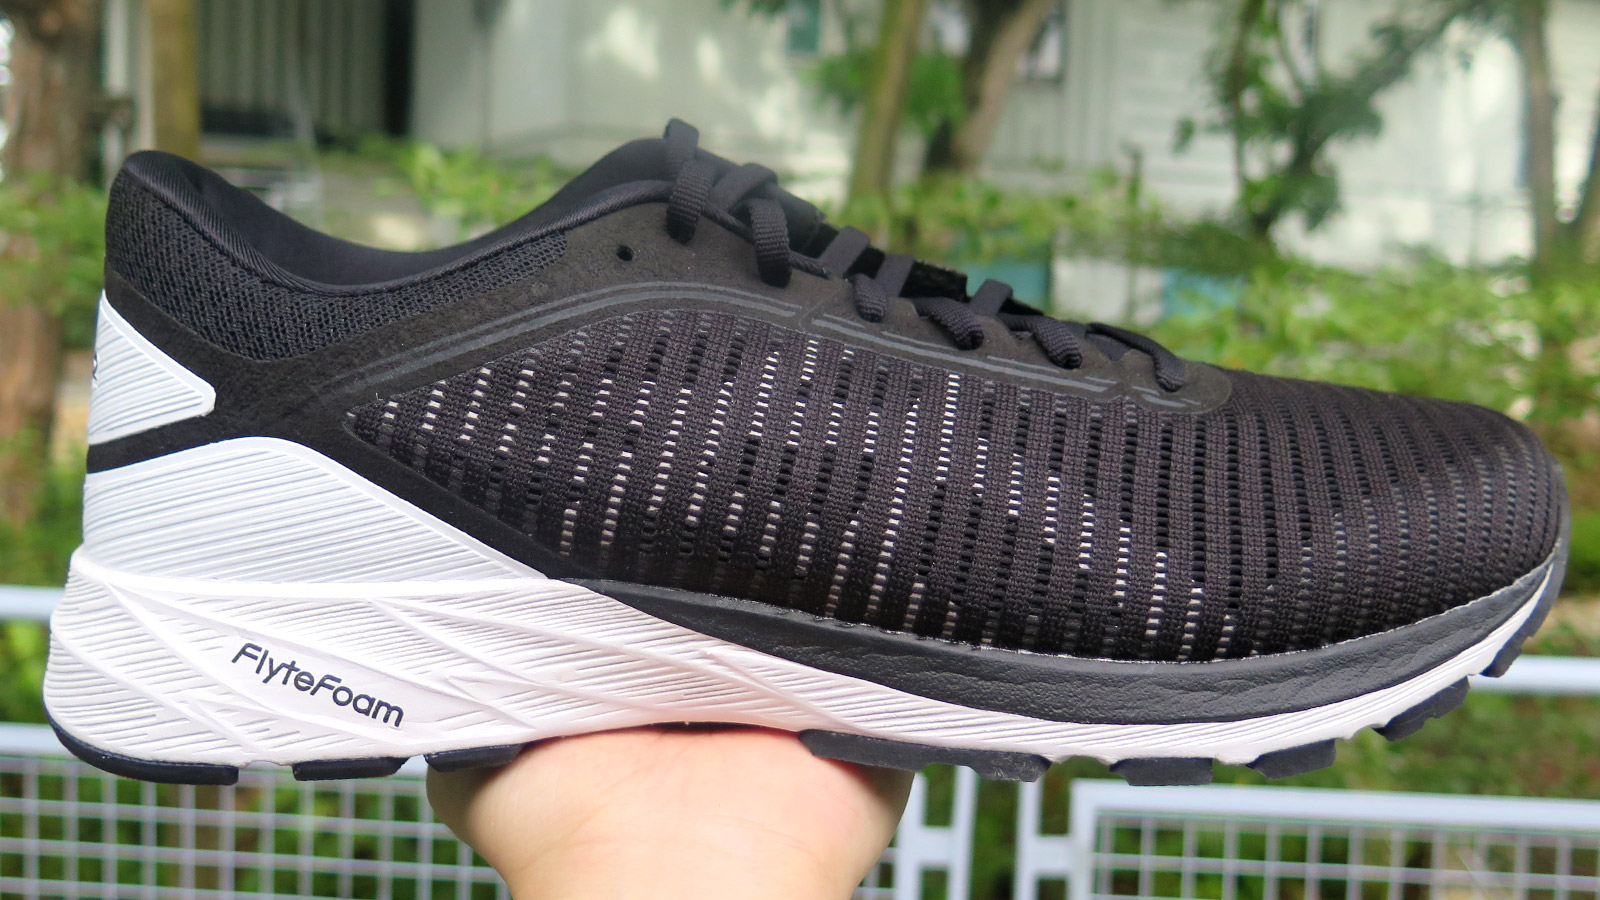 ASICS DynaFlyte 2 Shoes Review: When I 